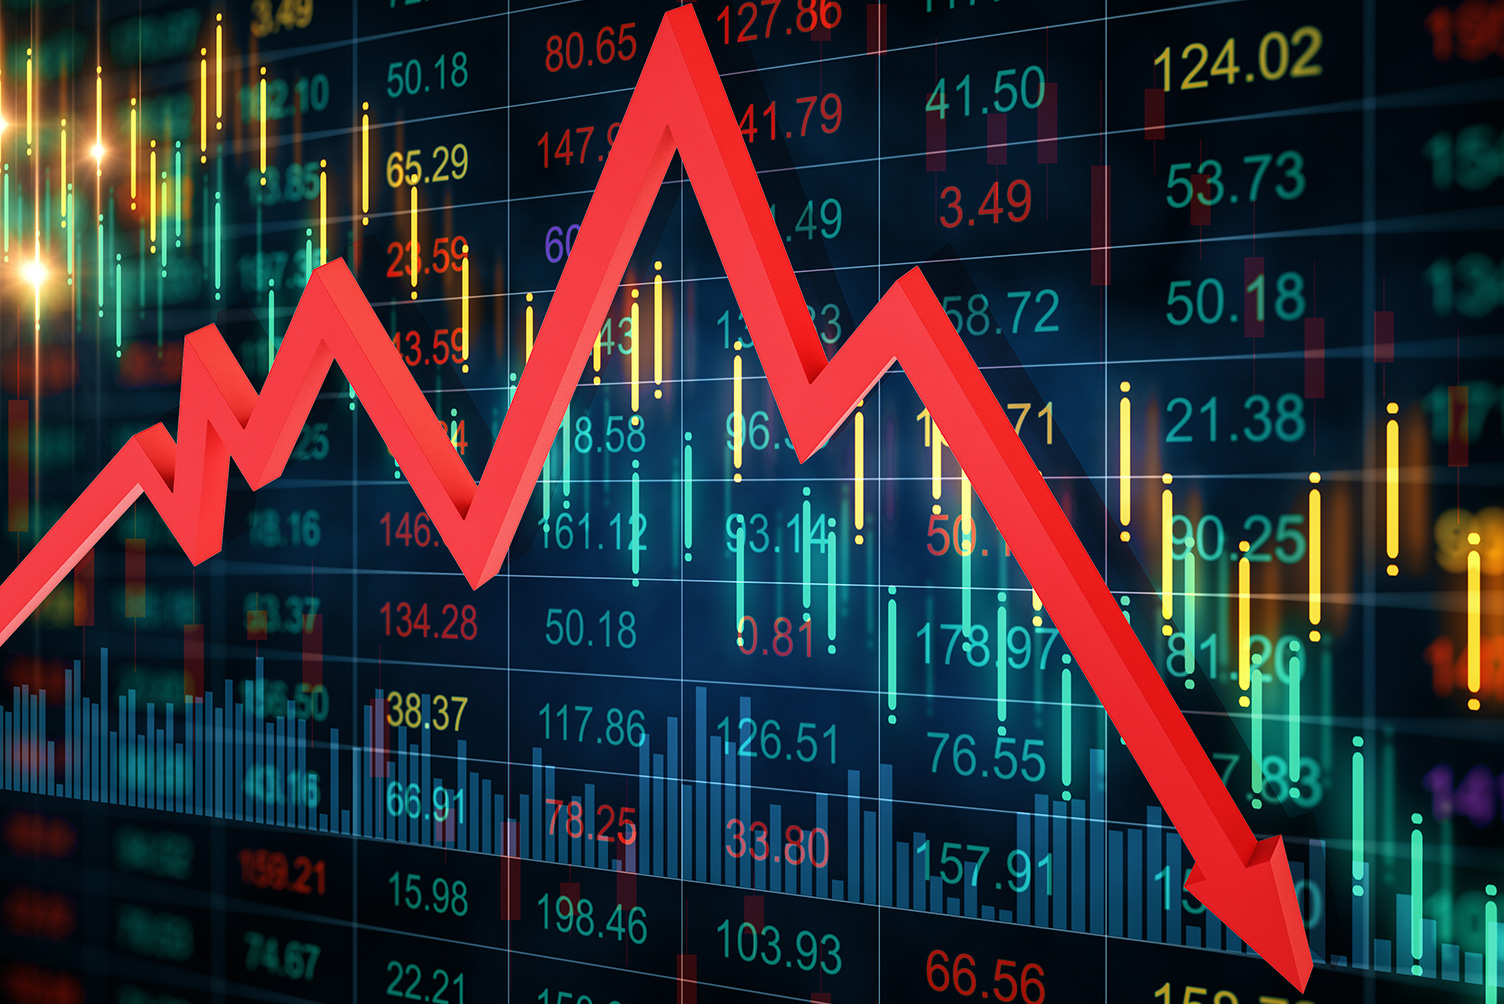 The following 3 stocks fared the worst amid yesterday's decline